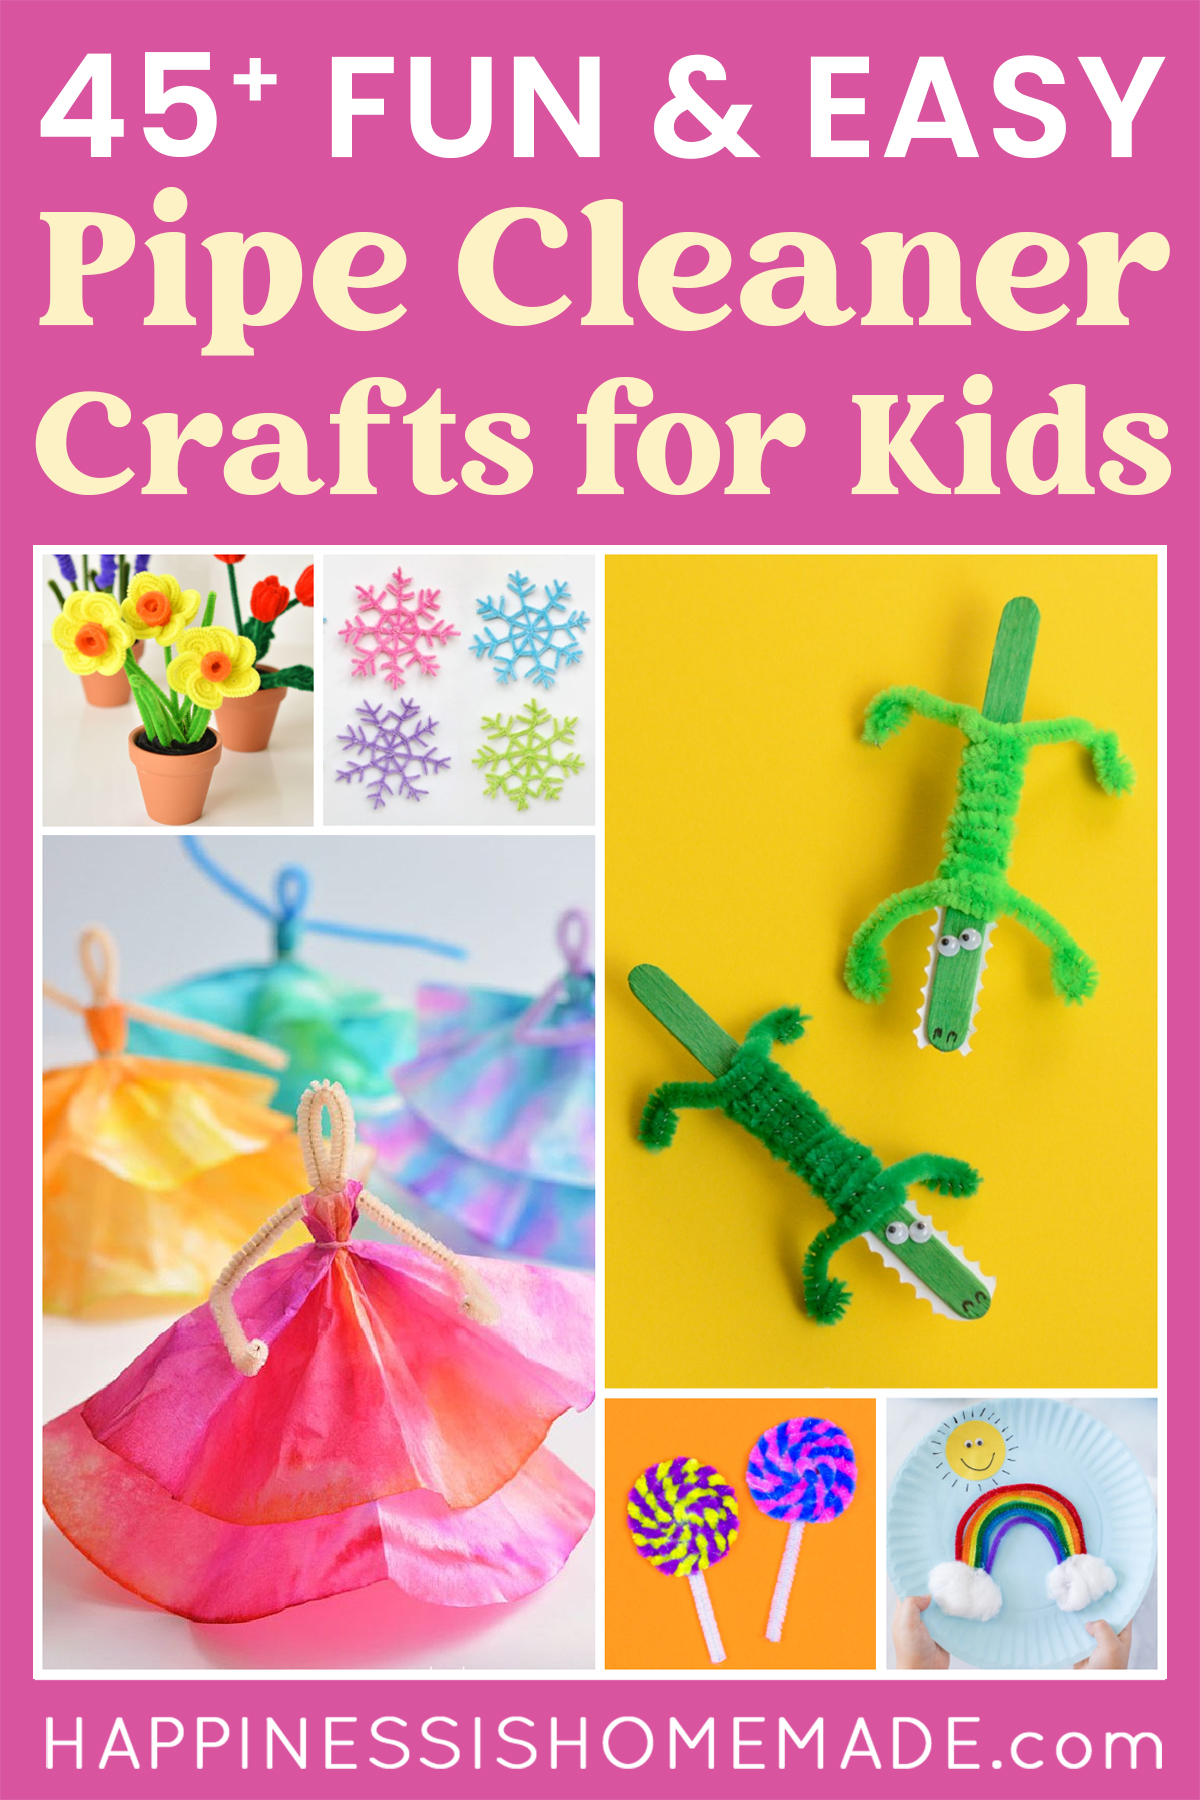 https://www.happinessishomemade.net/wp-content/uploads/2020/03/45-Fun-Easy-Pipe-Cleaner-Crafts-for-Kids.jpg